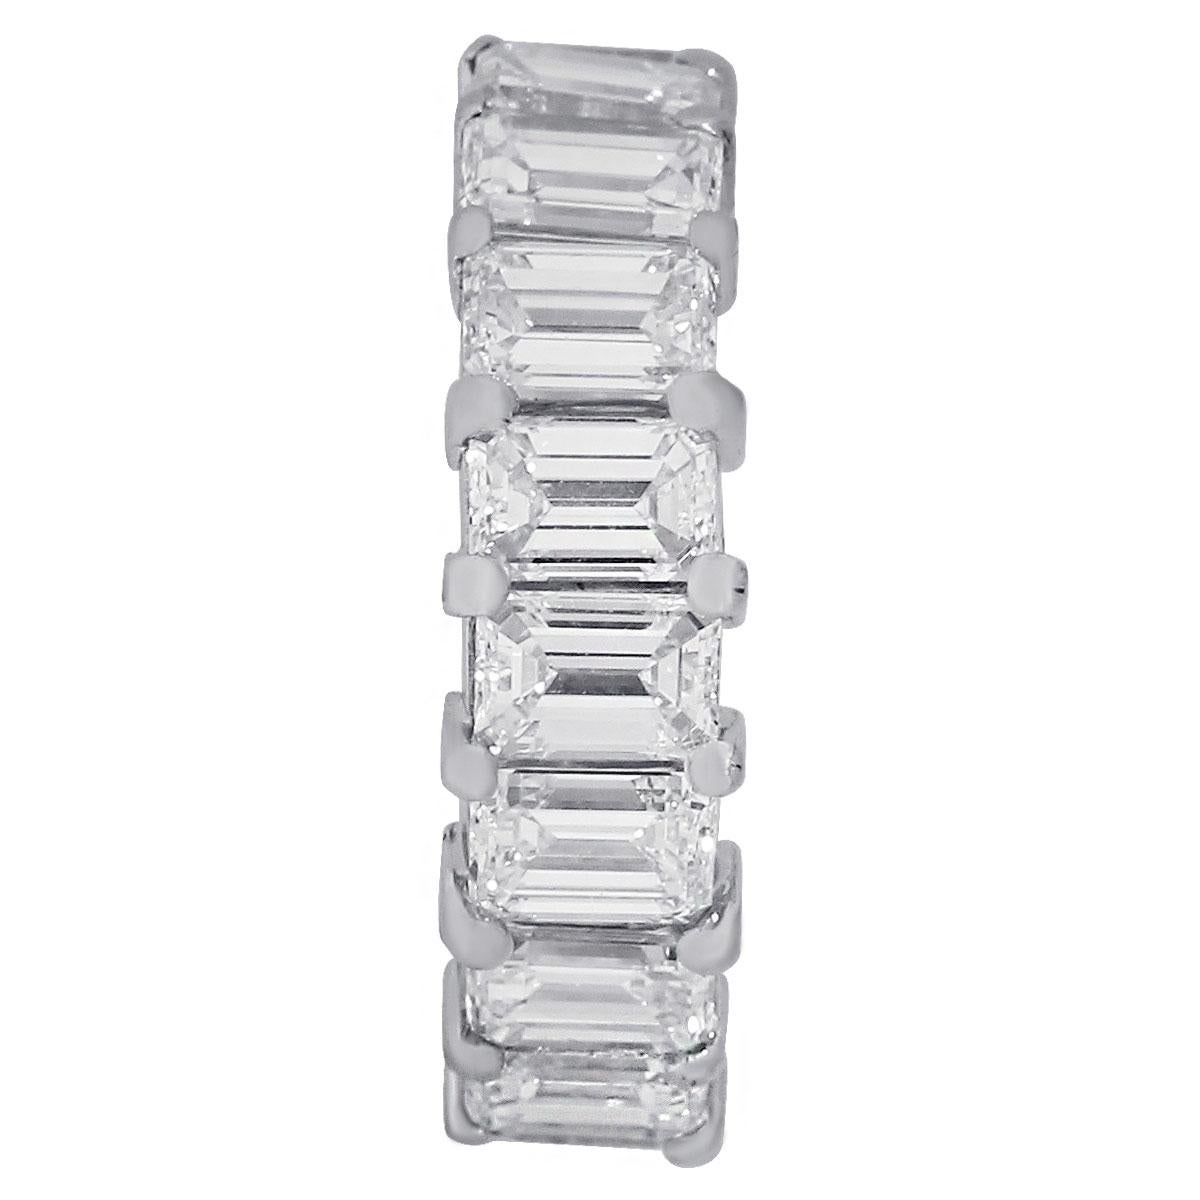 Material: Platinum
Diamond Details: Approximately 7ctw of 19 emerald cut diamonds. Diamonds are G in color, VS in clarity
Ring Size: 6.5
Ring Measurements: 0.89” x 0.22” x 0.89″
Total Weight: 7.2g (4.6dwt)
SKU: R4941